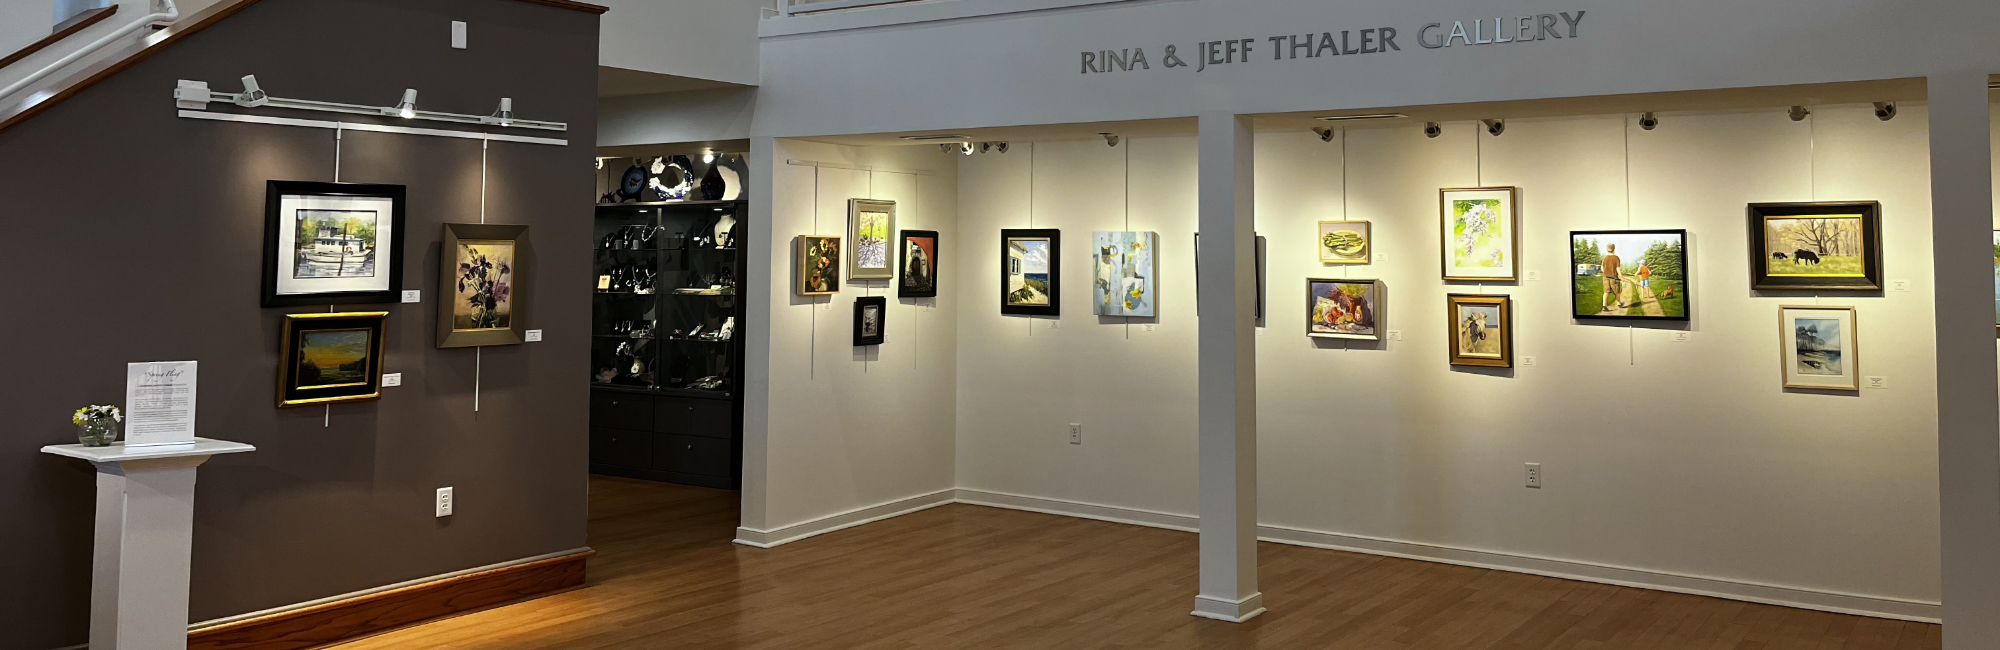 Featured in the Thaler Gallery / "Spring Fling", Exhibition by the Working Artists Forum